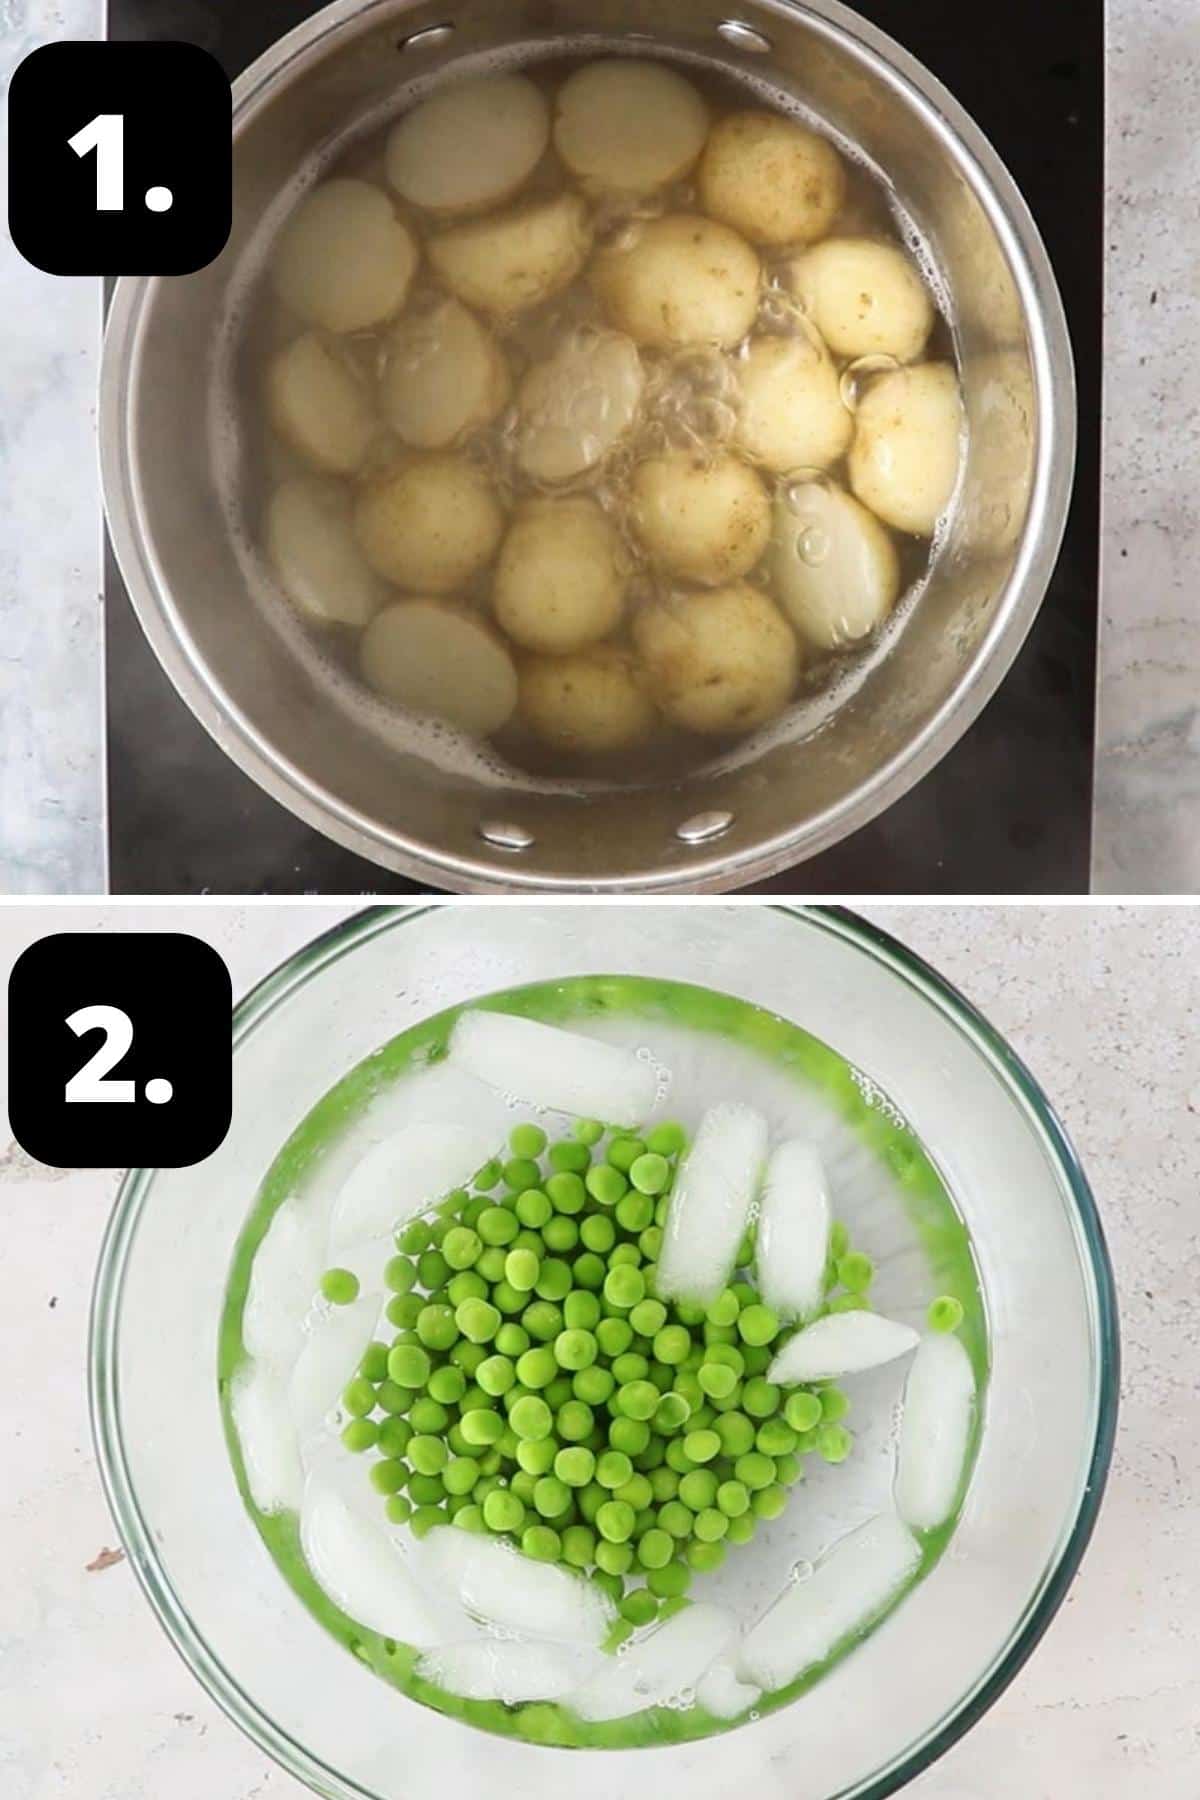 Steps 1-2 of preparing this recipe - boiling the potatoes and the cooked peas in a bowl of iced water.